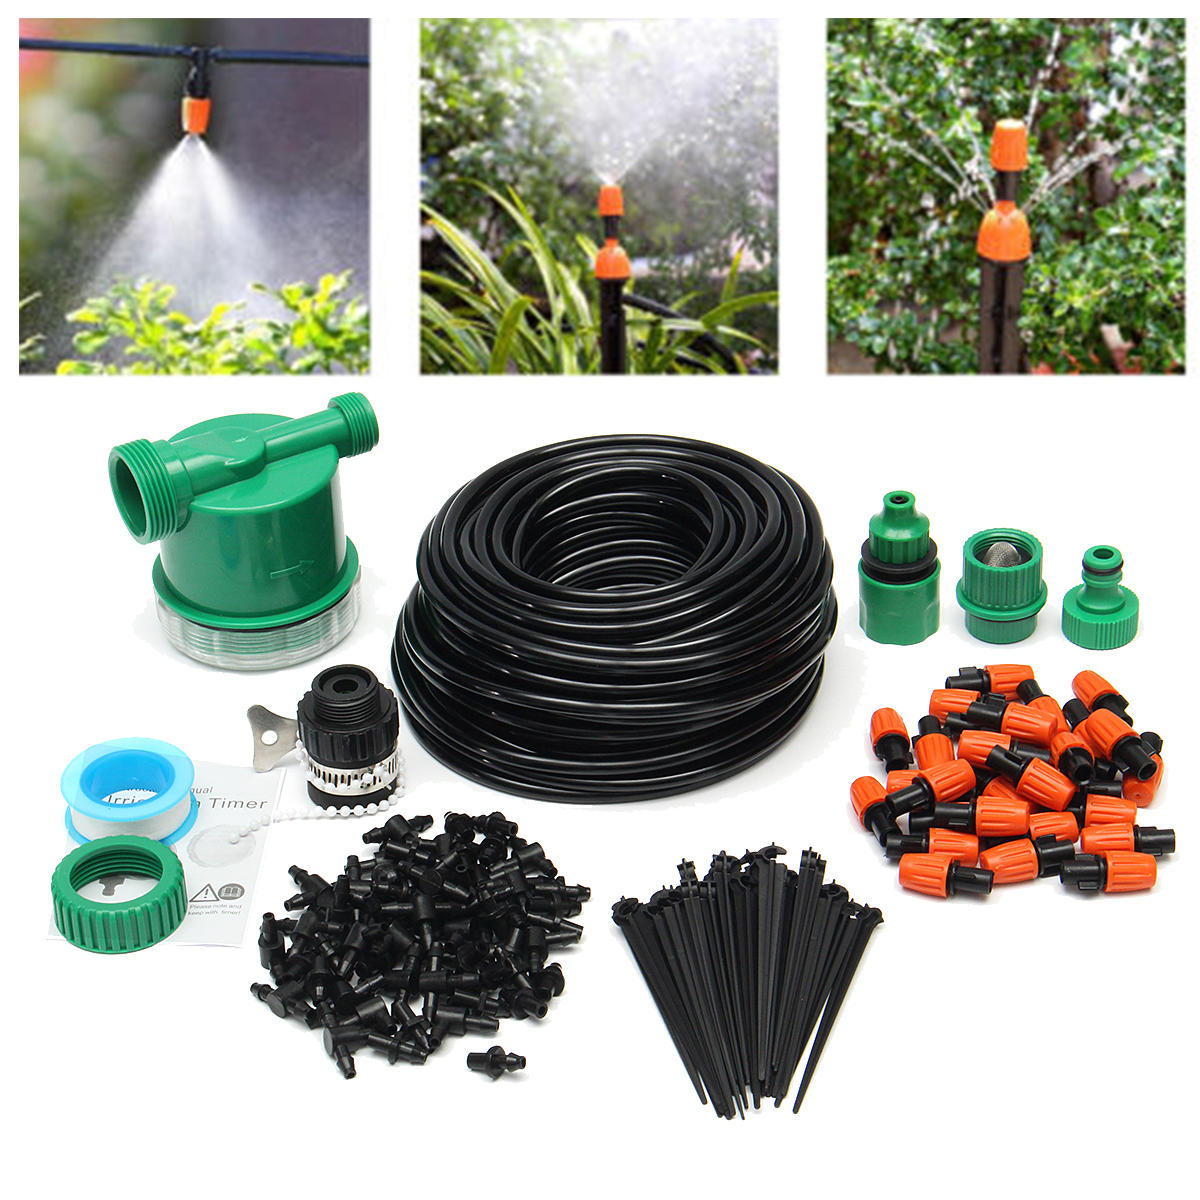 

122Pcs Automatic Drip Irrigation DIY Watering System Sprinkler Electronic Control Timer Garden Hose 25M